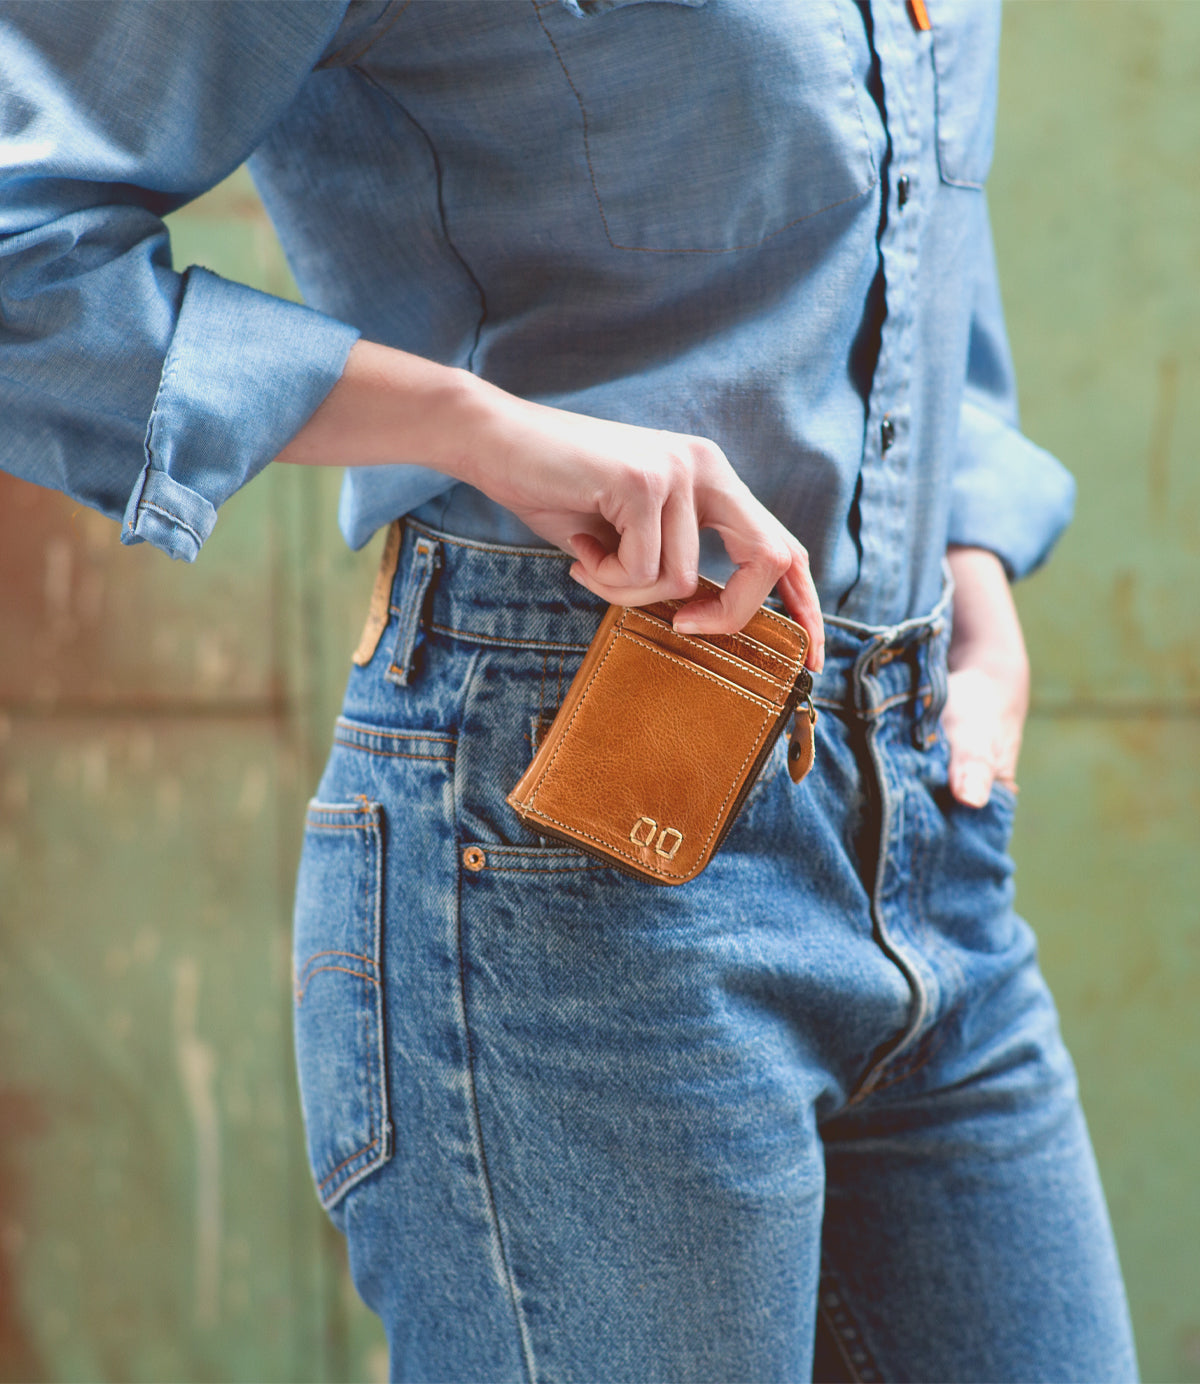 A woman is holding a Bed Stu Carrie wallet in her jeans.